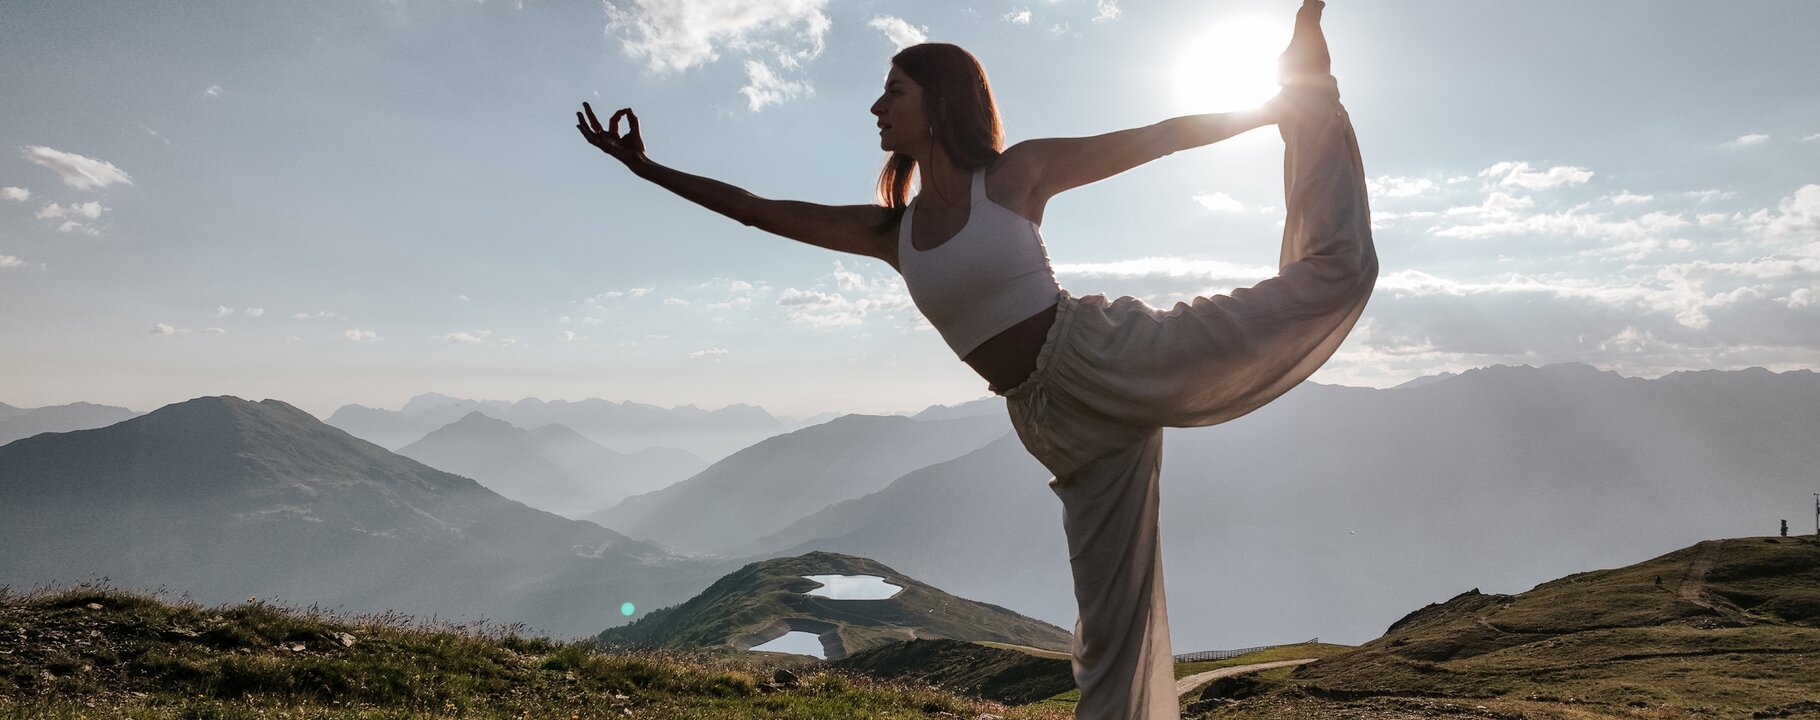 morning yoga session with panoramic views in Serfaus.-Fiss-Ladis in Tyrol | © Fisser Bergbahnen GmbH